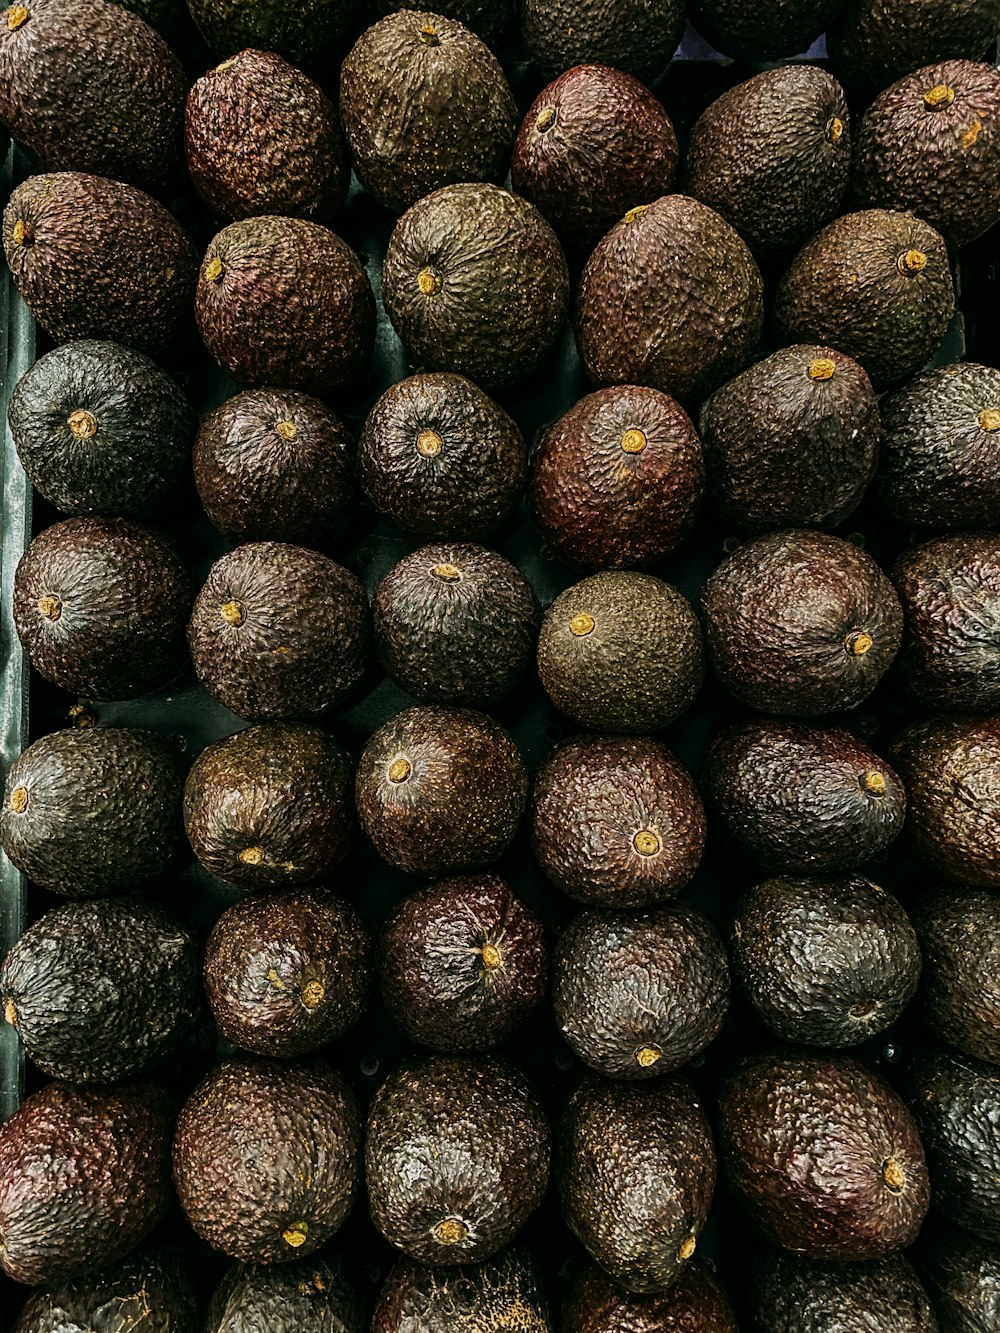 brown and black round fruits